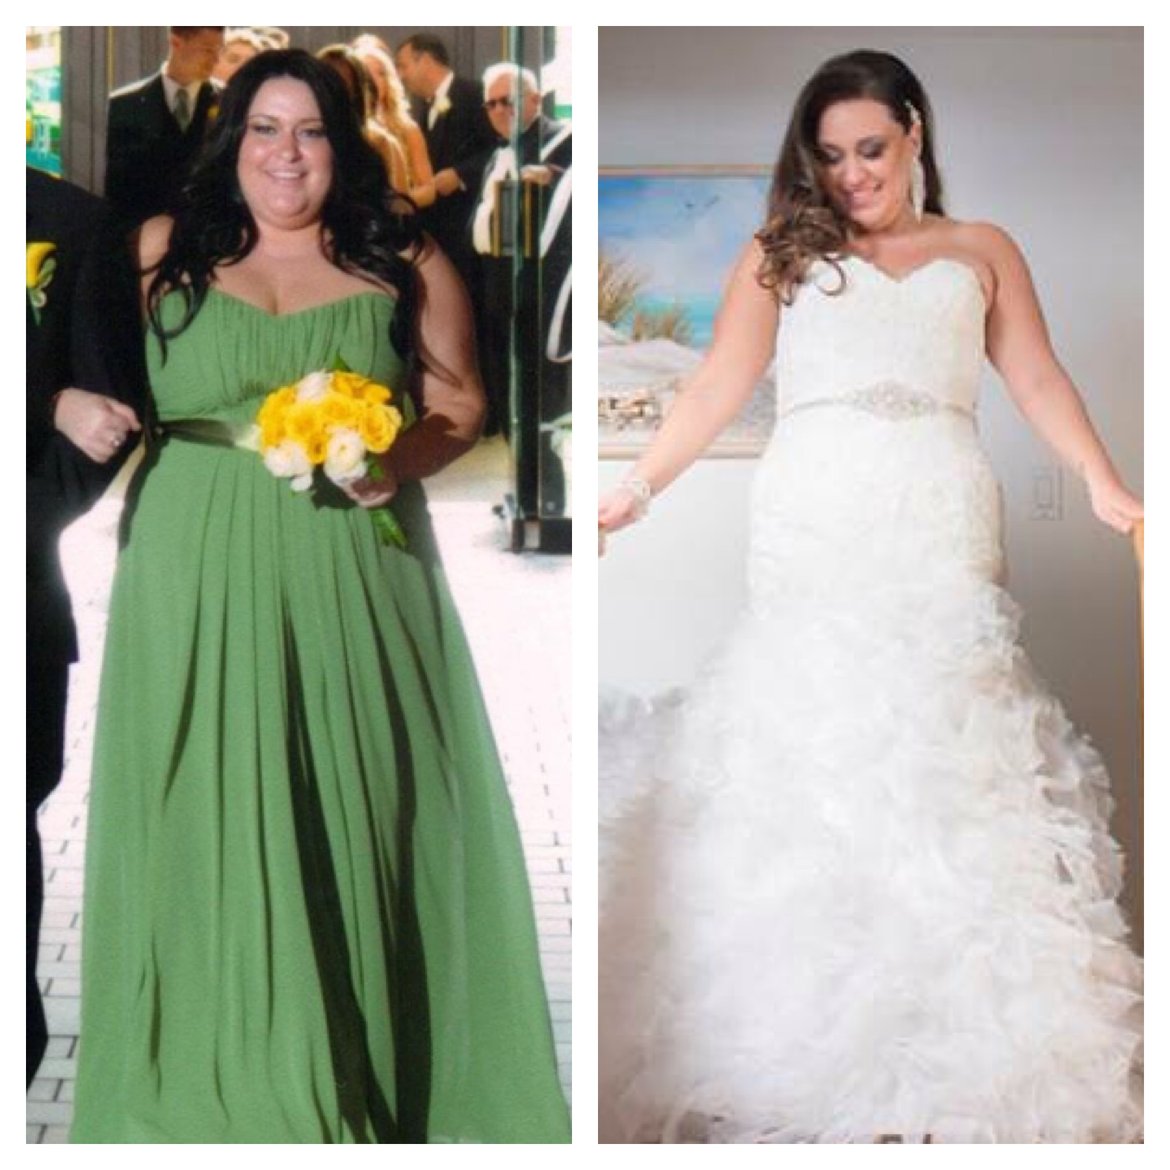 Before/after weight loss in wedding dress : r/wedding